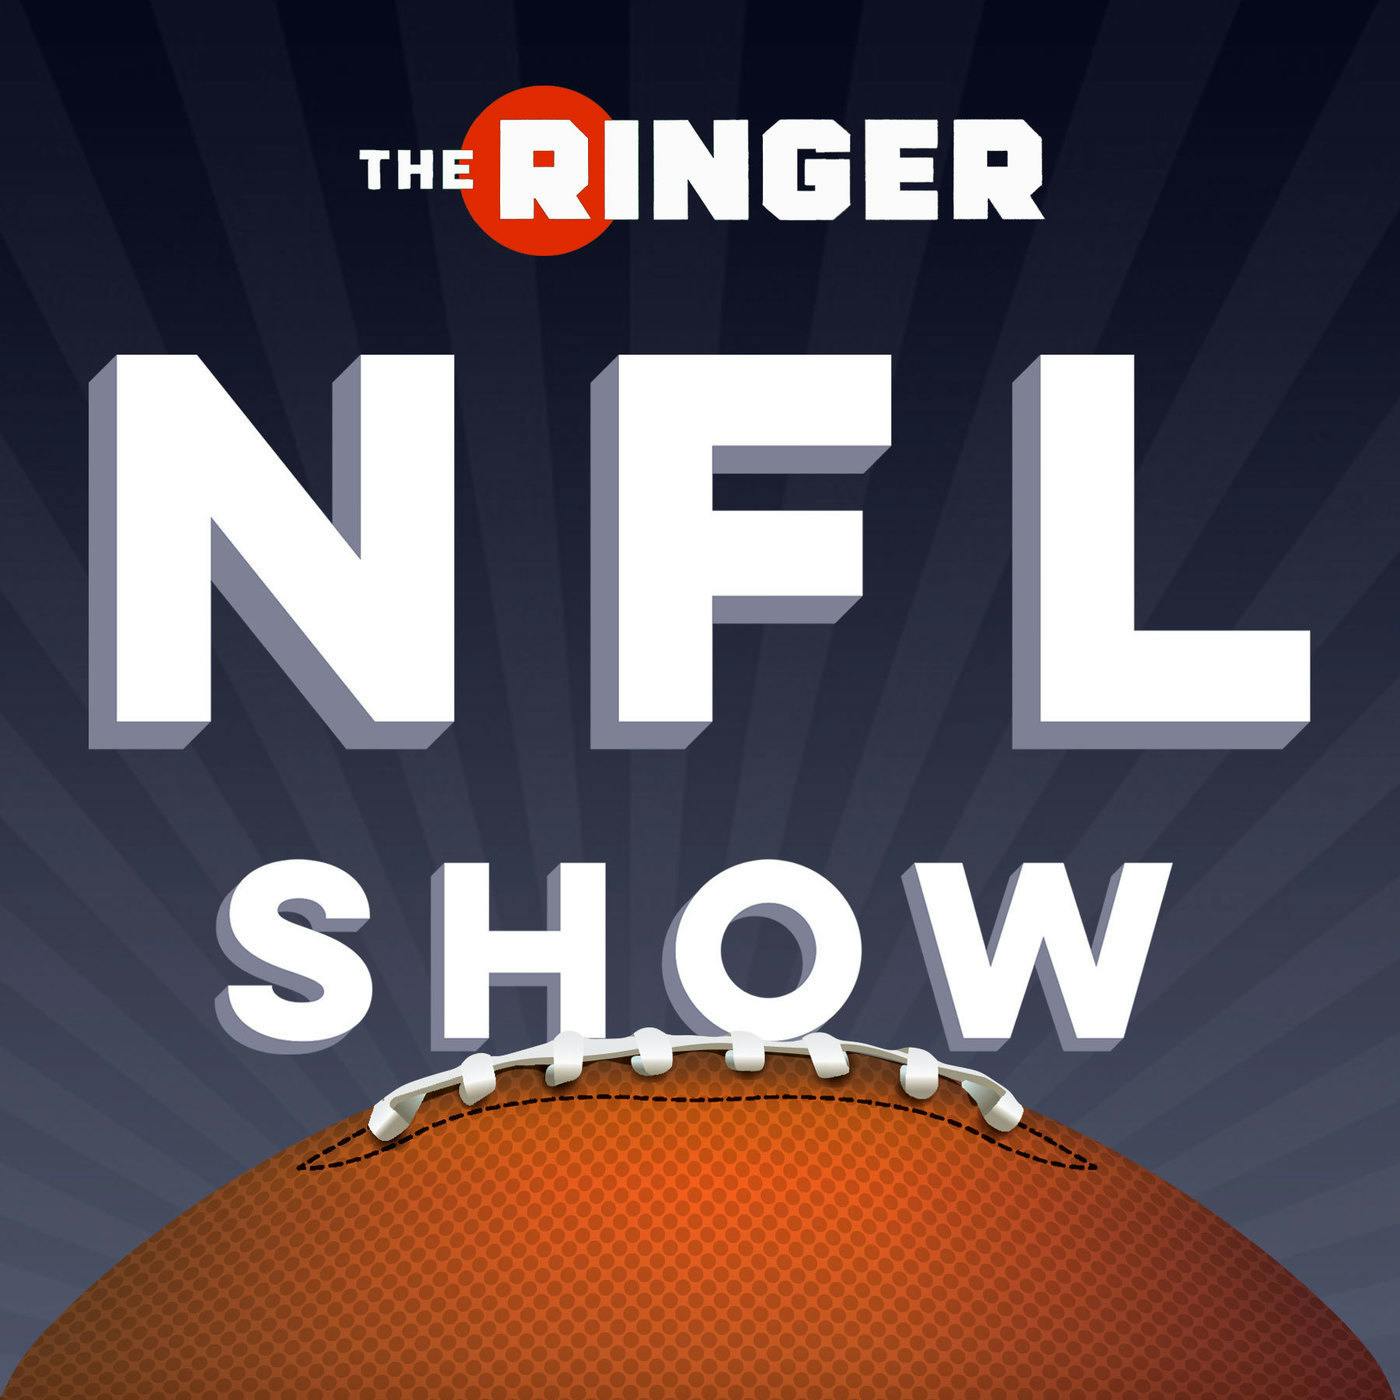 Luke Kuechly’s Retirement, LSU’s Joe Brady to the Panthers, and the Conference Championships | The Ringer NFL Show